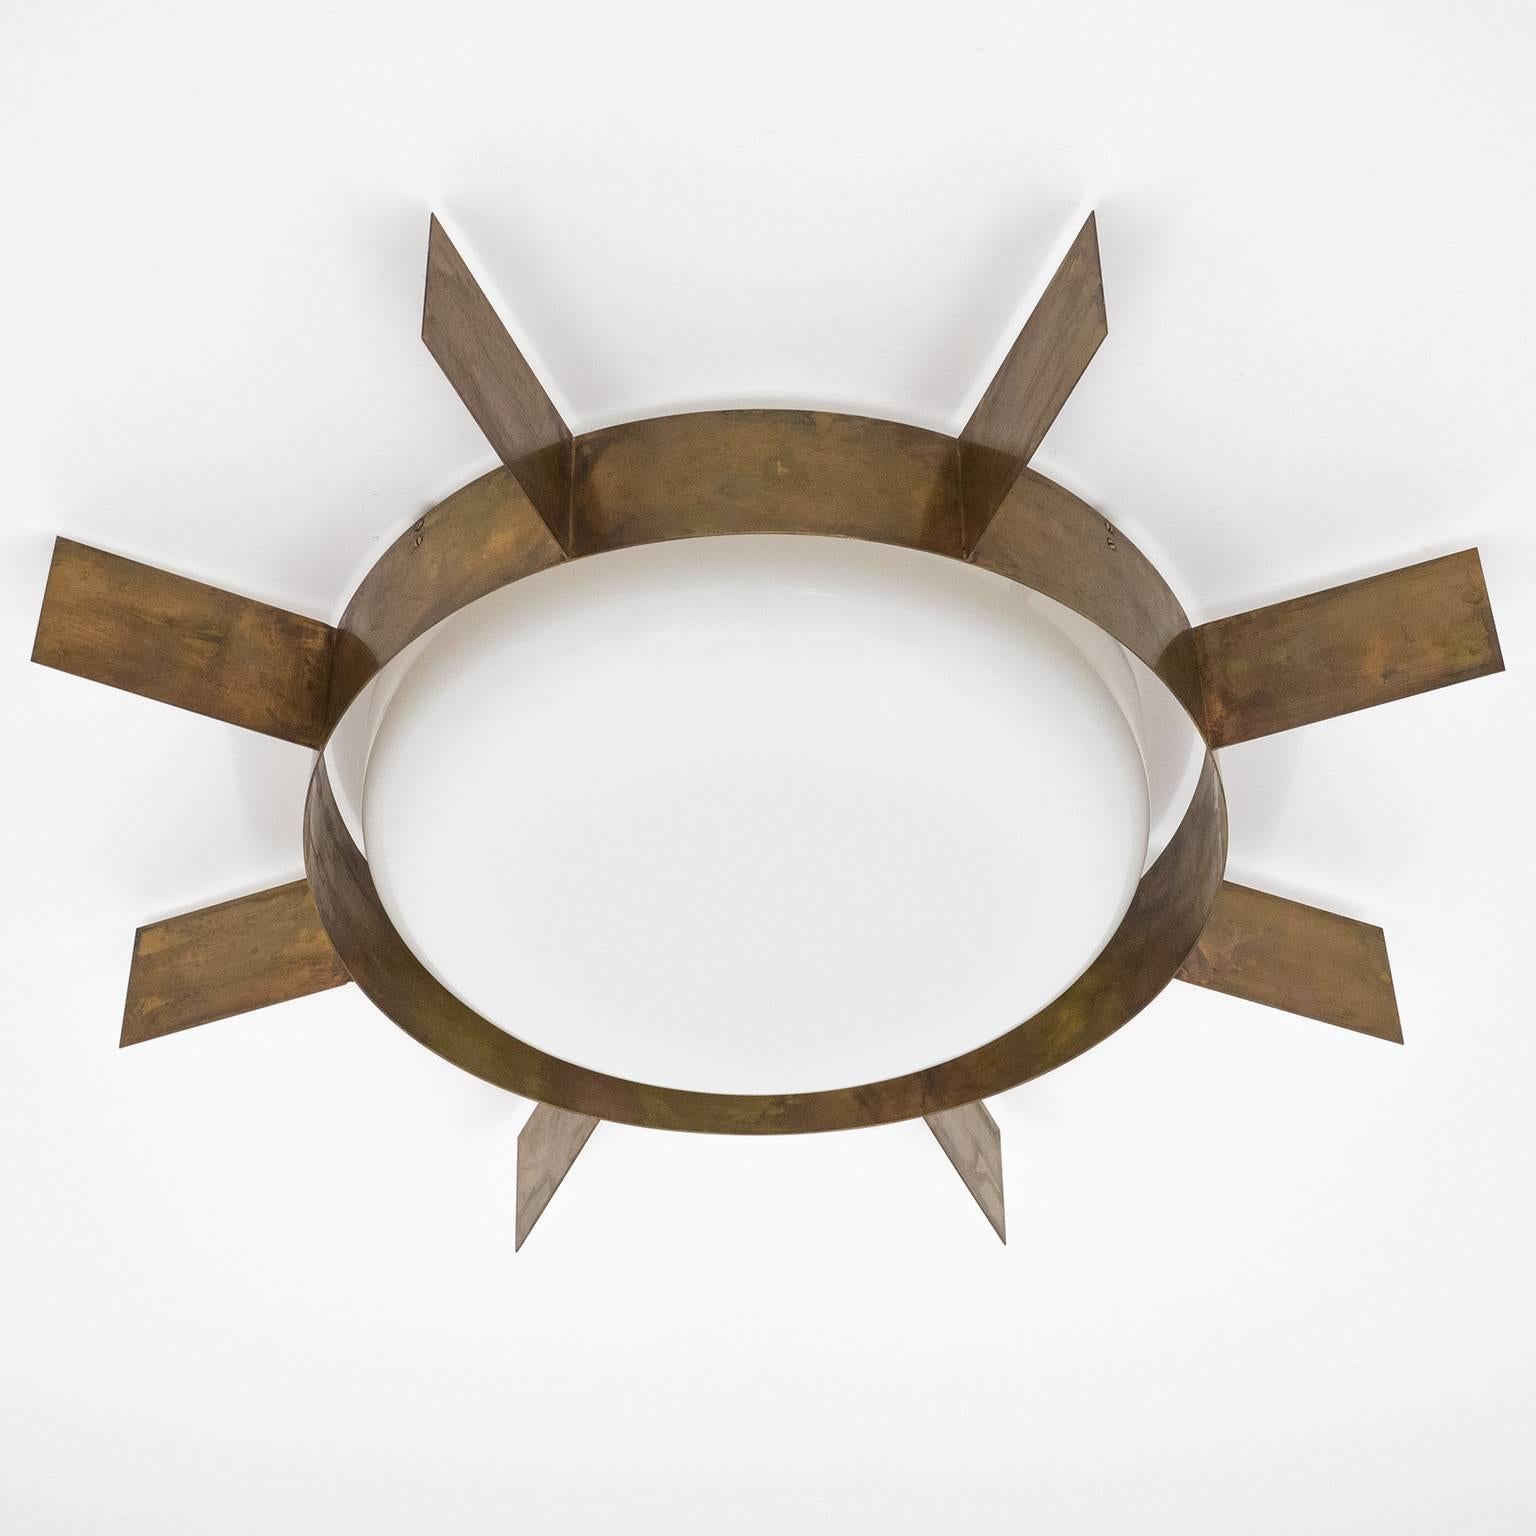 Iconic brass sunburst ceiling lights designed by Gio Ponti and manufactured by Arredoluce in Italy, 1950s. The hardware is entirely of untreated brass which has developed a beautiful patina over the decades. Under the large white Perspex diffuser